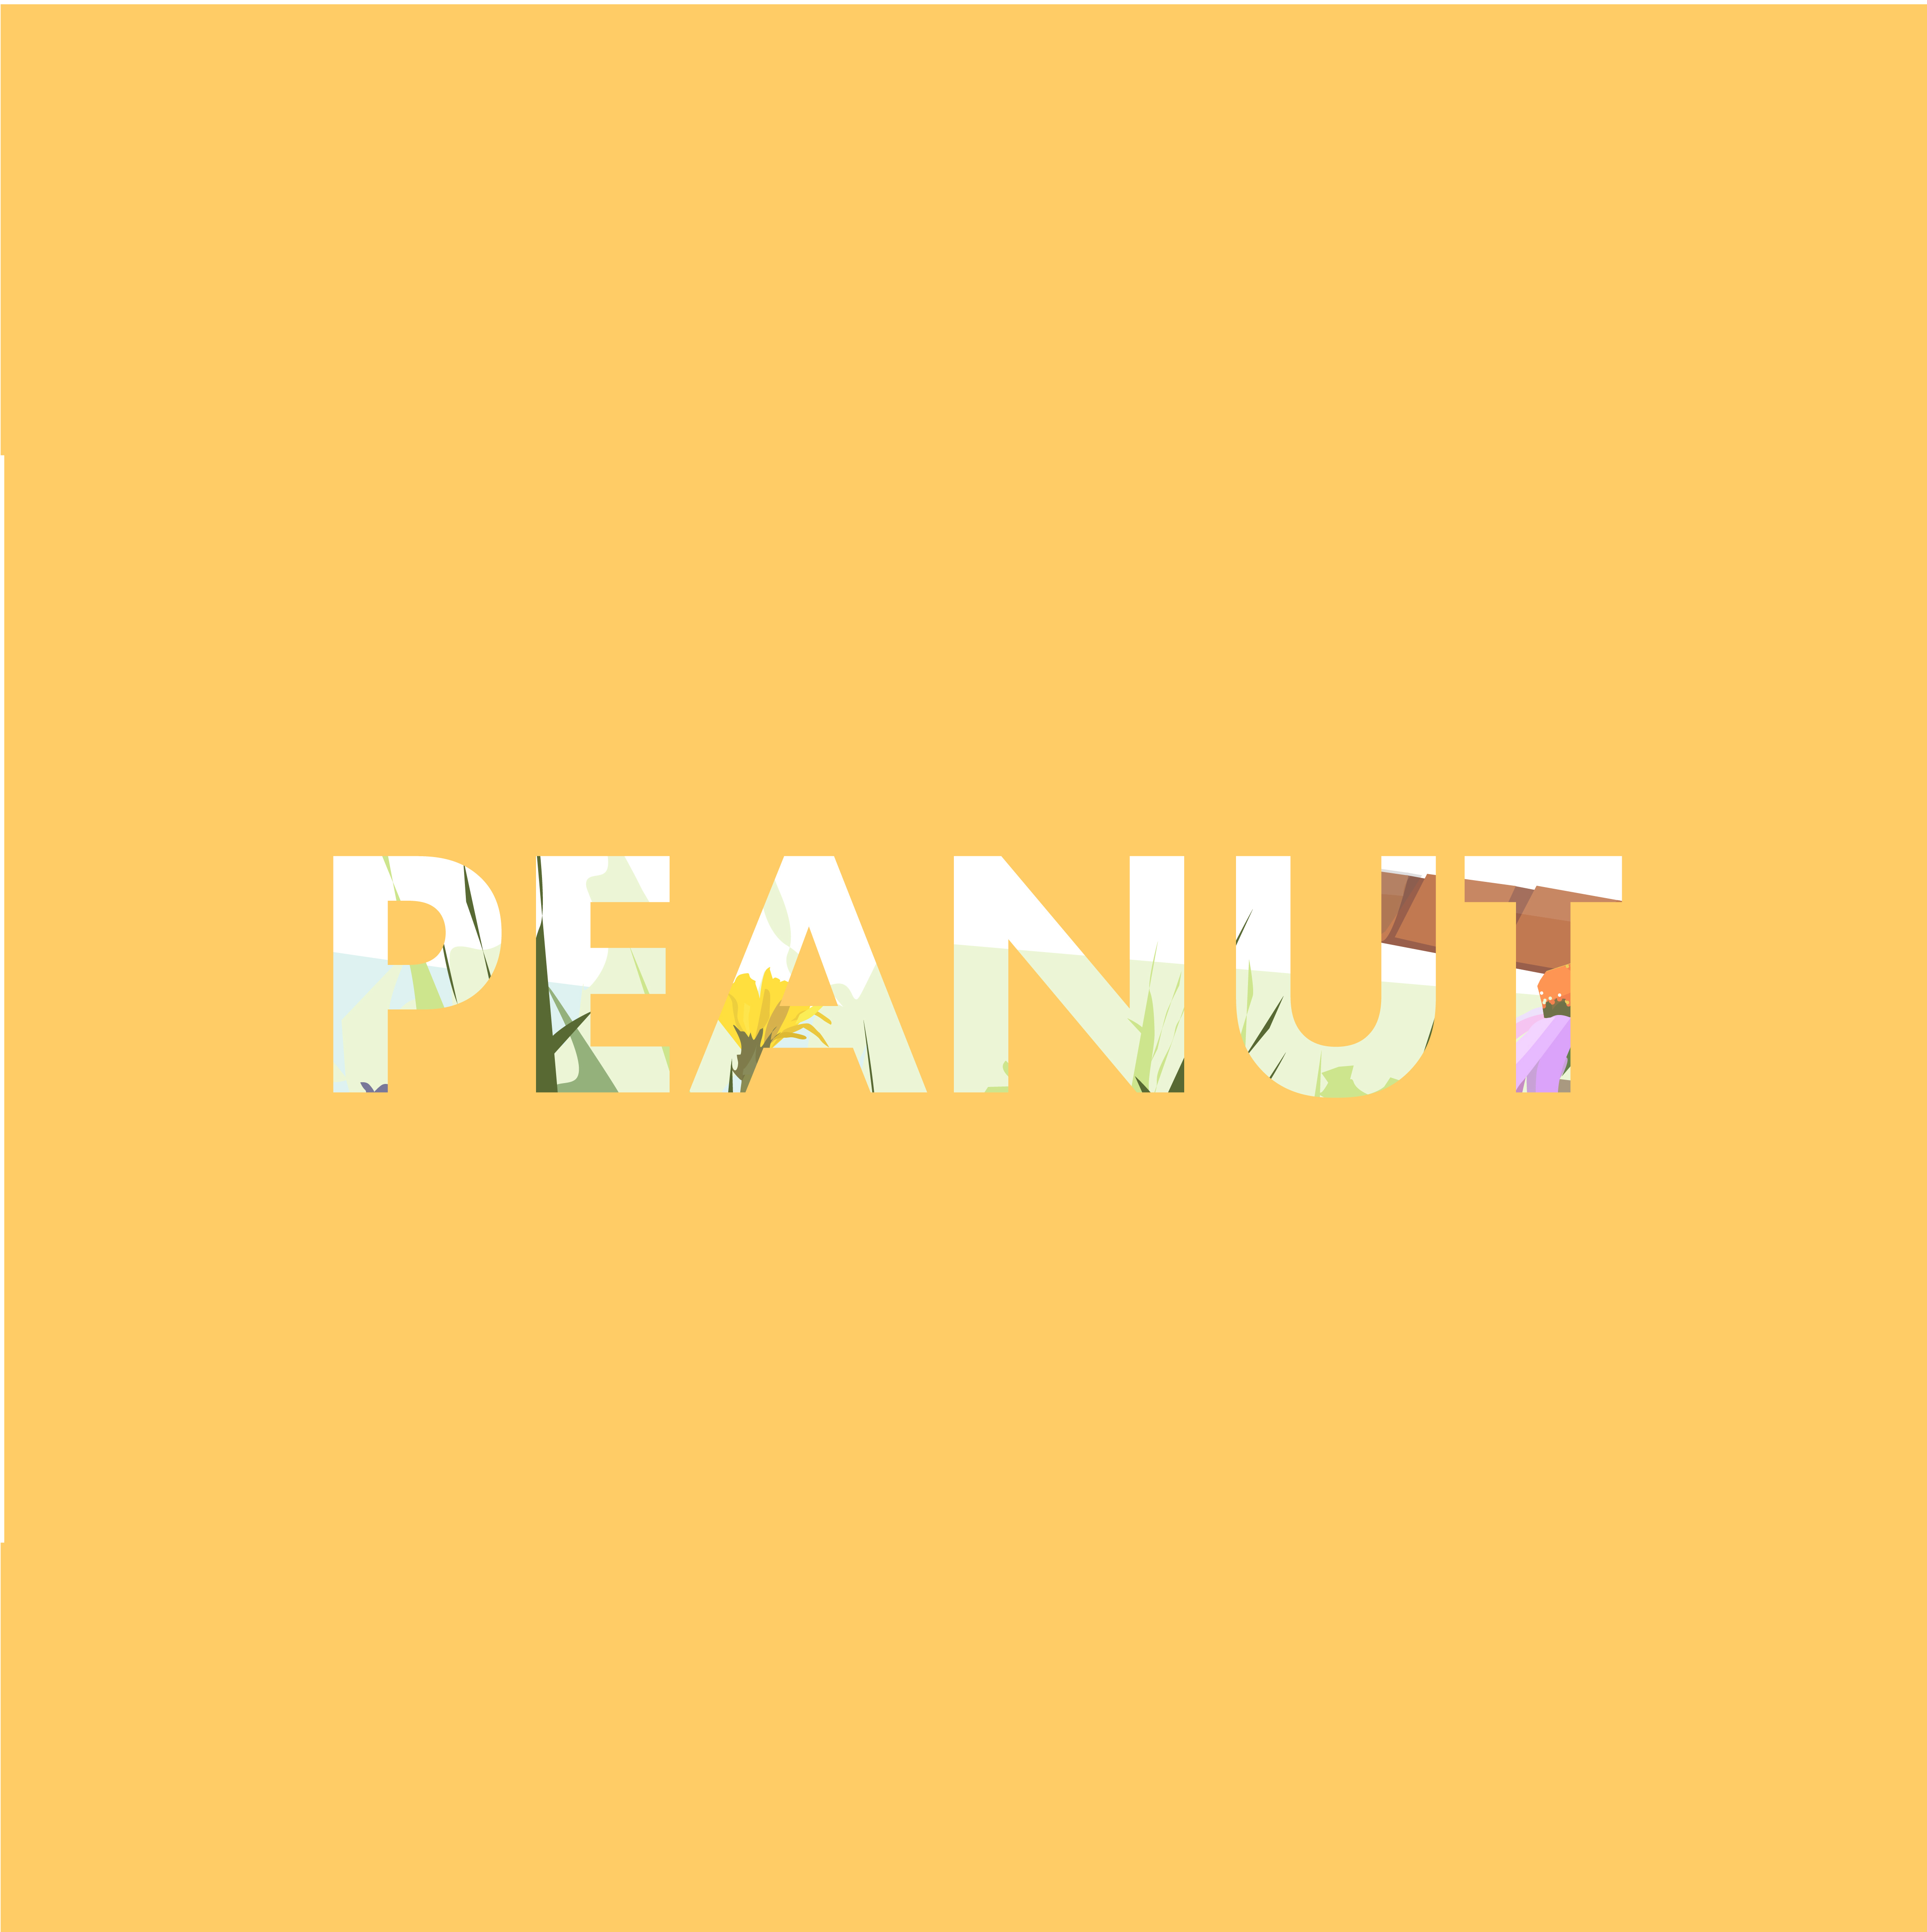 Peanut by Noel Hernon, 2D: Designed for Instagram format, 1080 x 1080, Any size is fine.